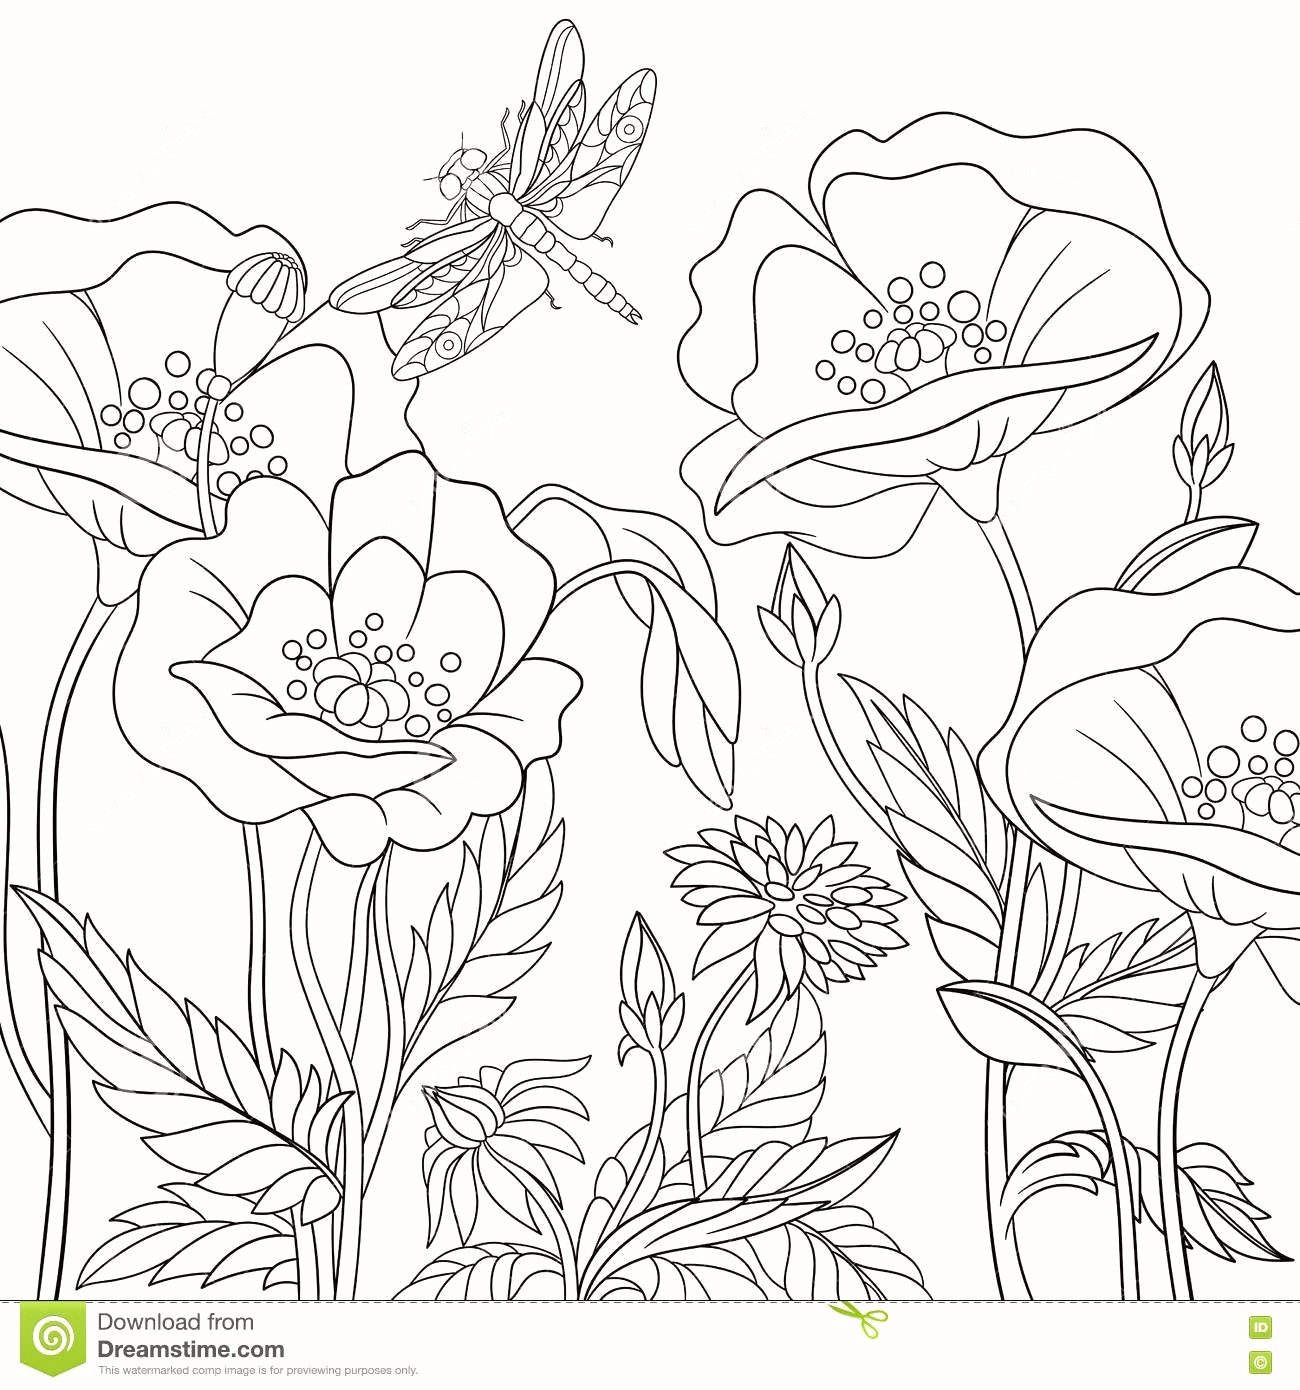 12 Famous Picture Of A Flower Vase to Color 2024 free download picture of a flower vase to color of flowers coloring pages luxury cool vases flower vase coloring page within flowers coloring pages beautiful cool vases flower vase coloring page pages flo